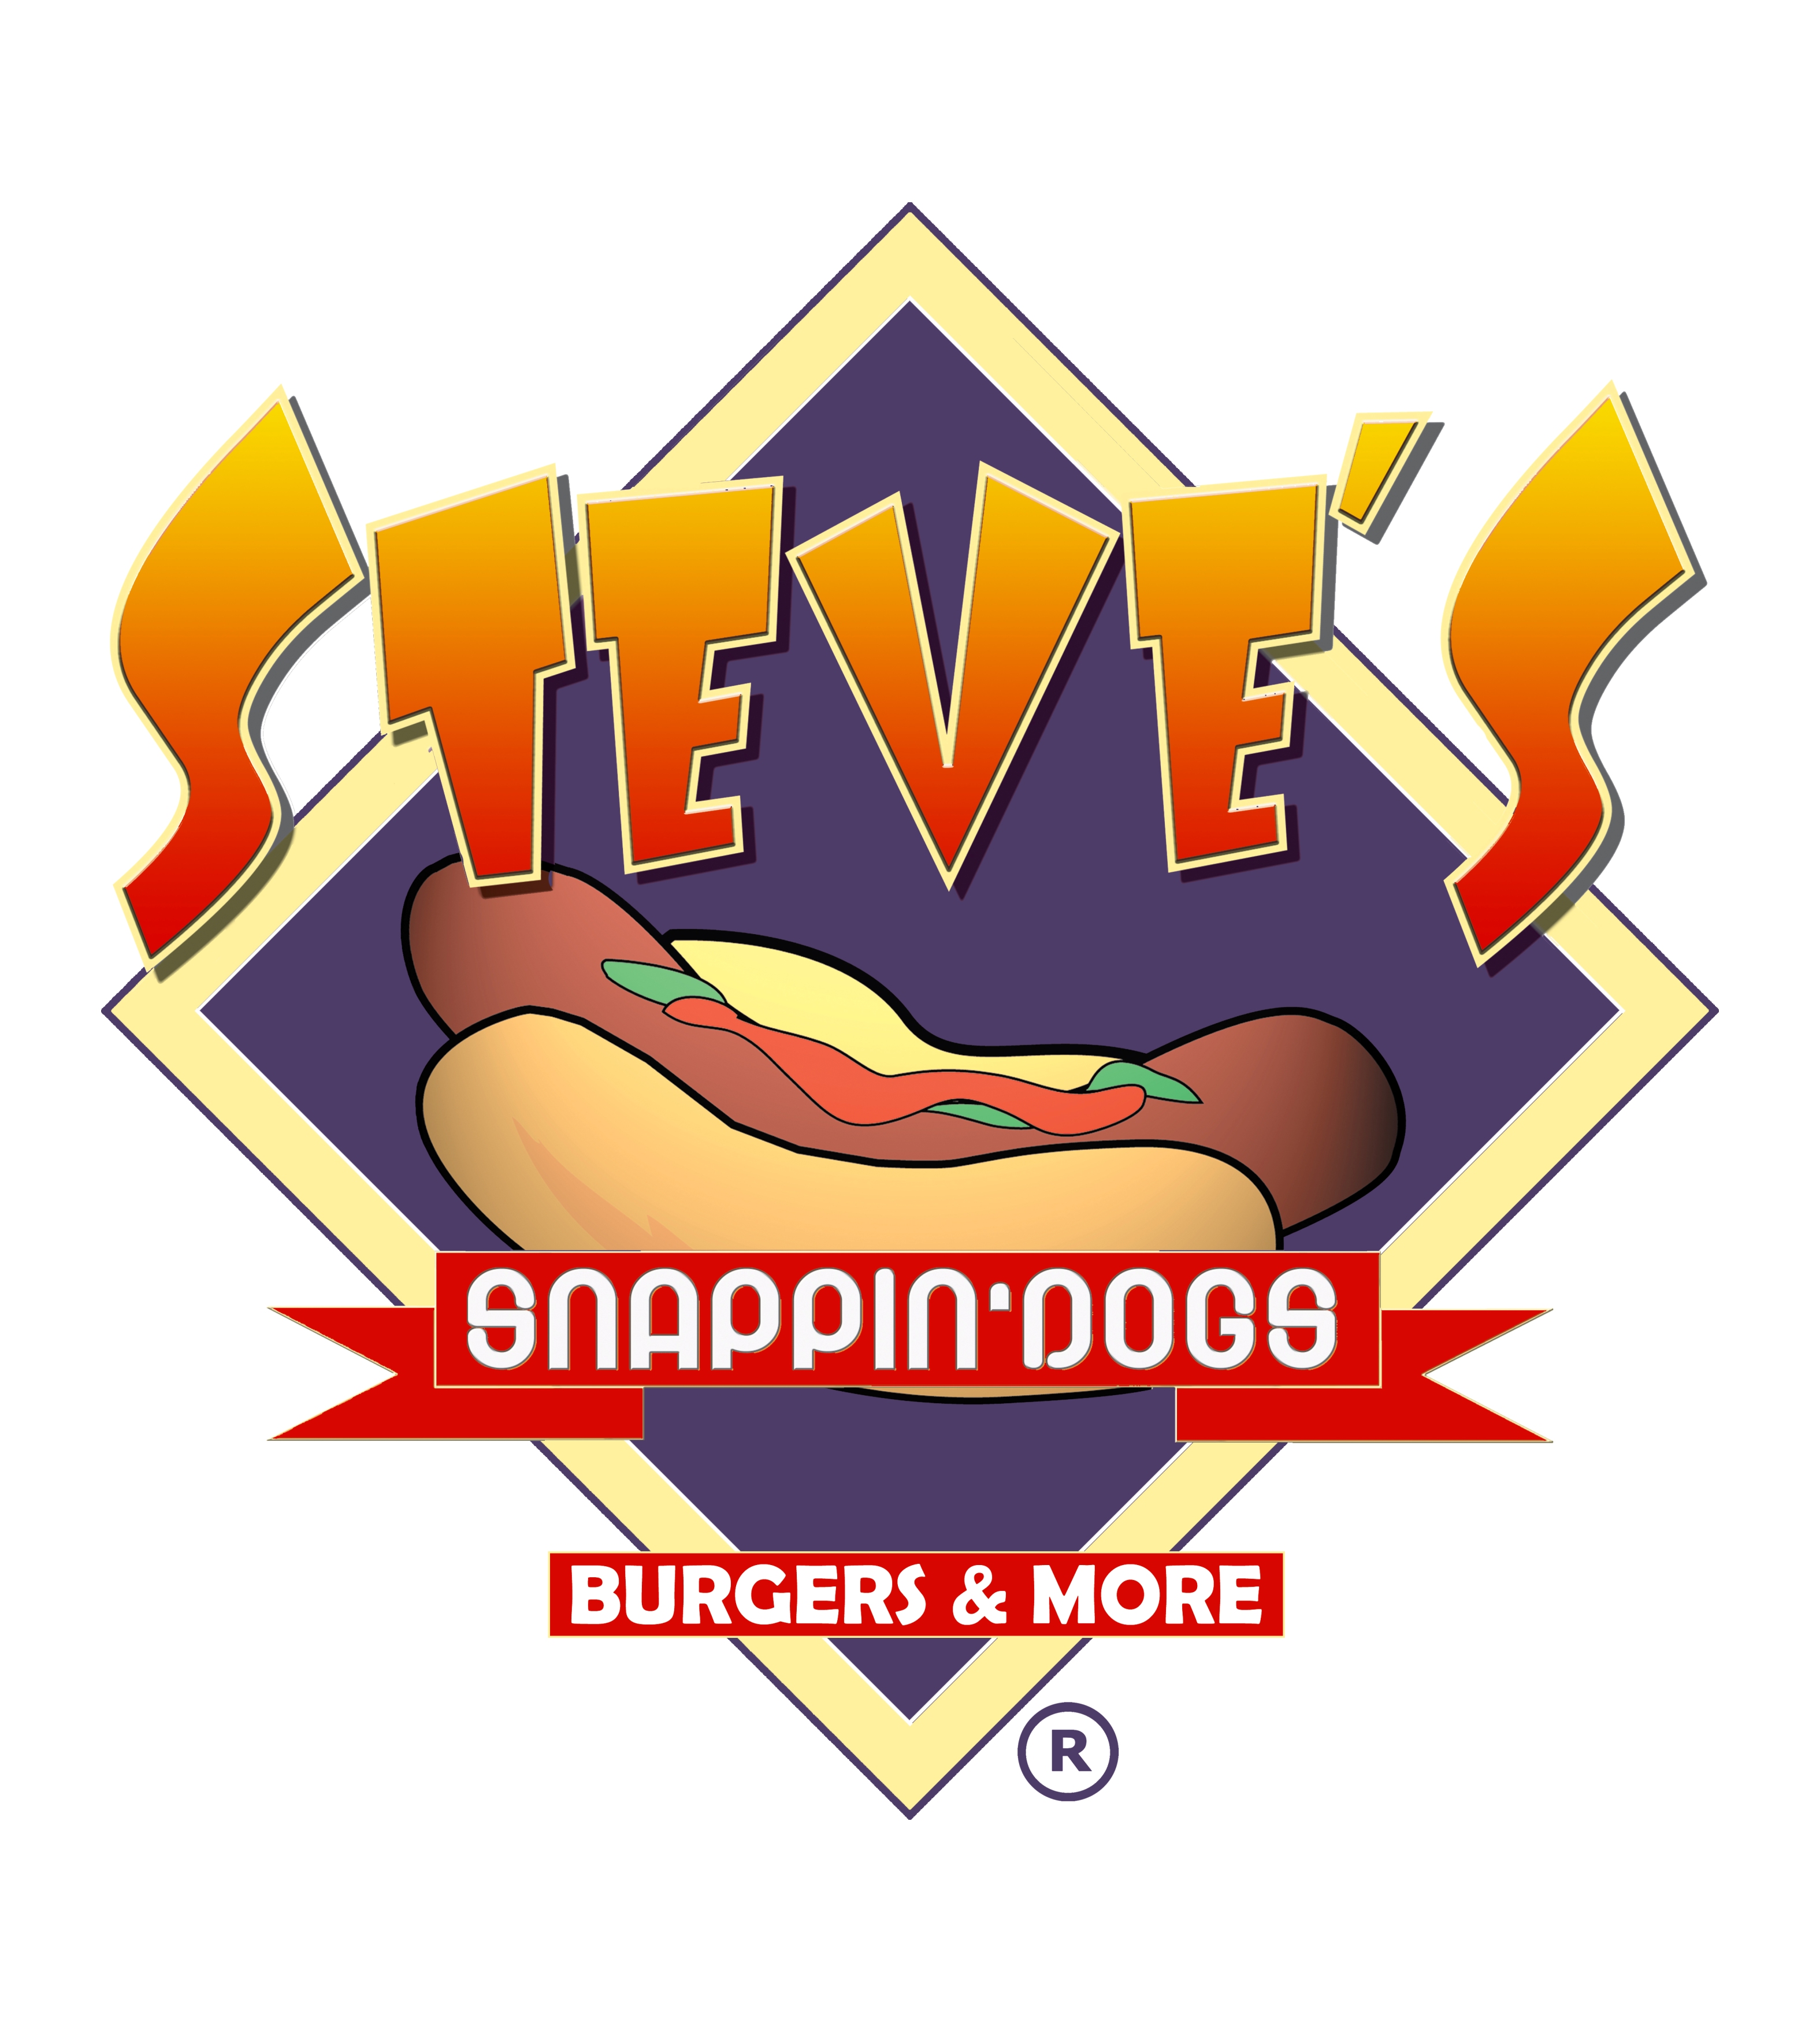 Steve’s Snappin’ Dogs